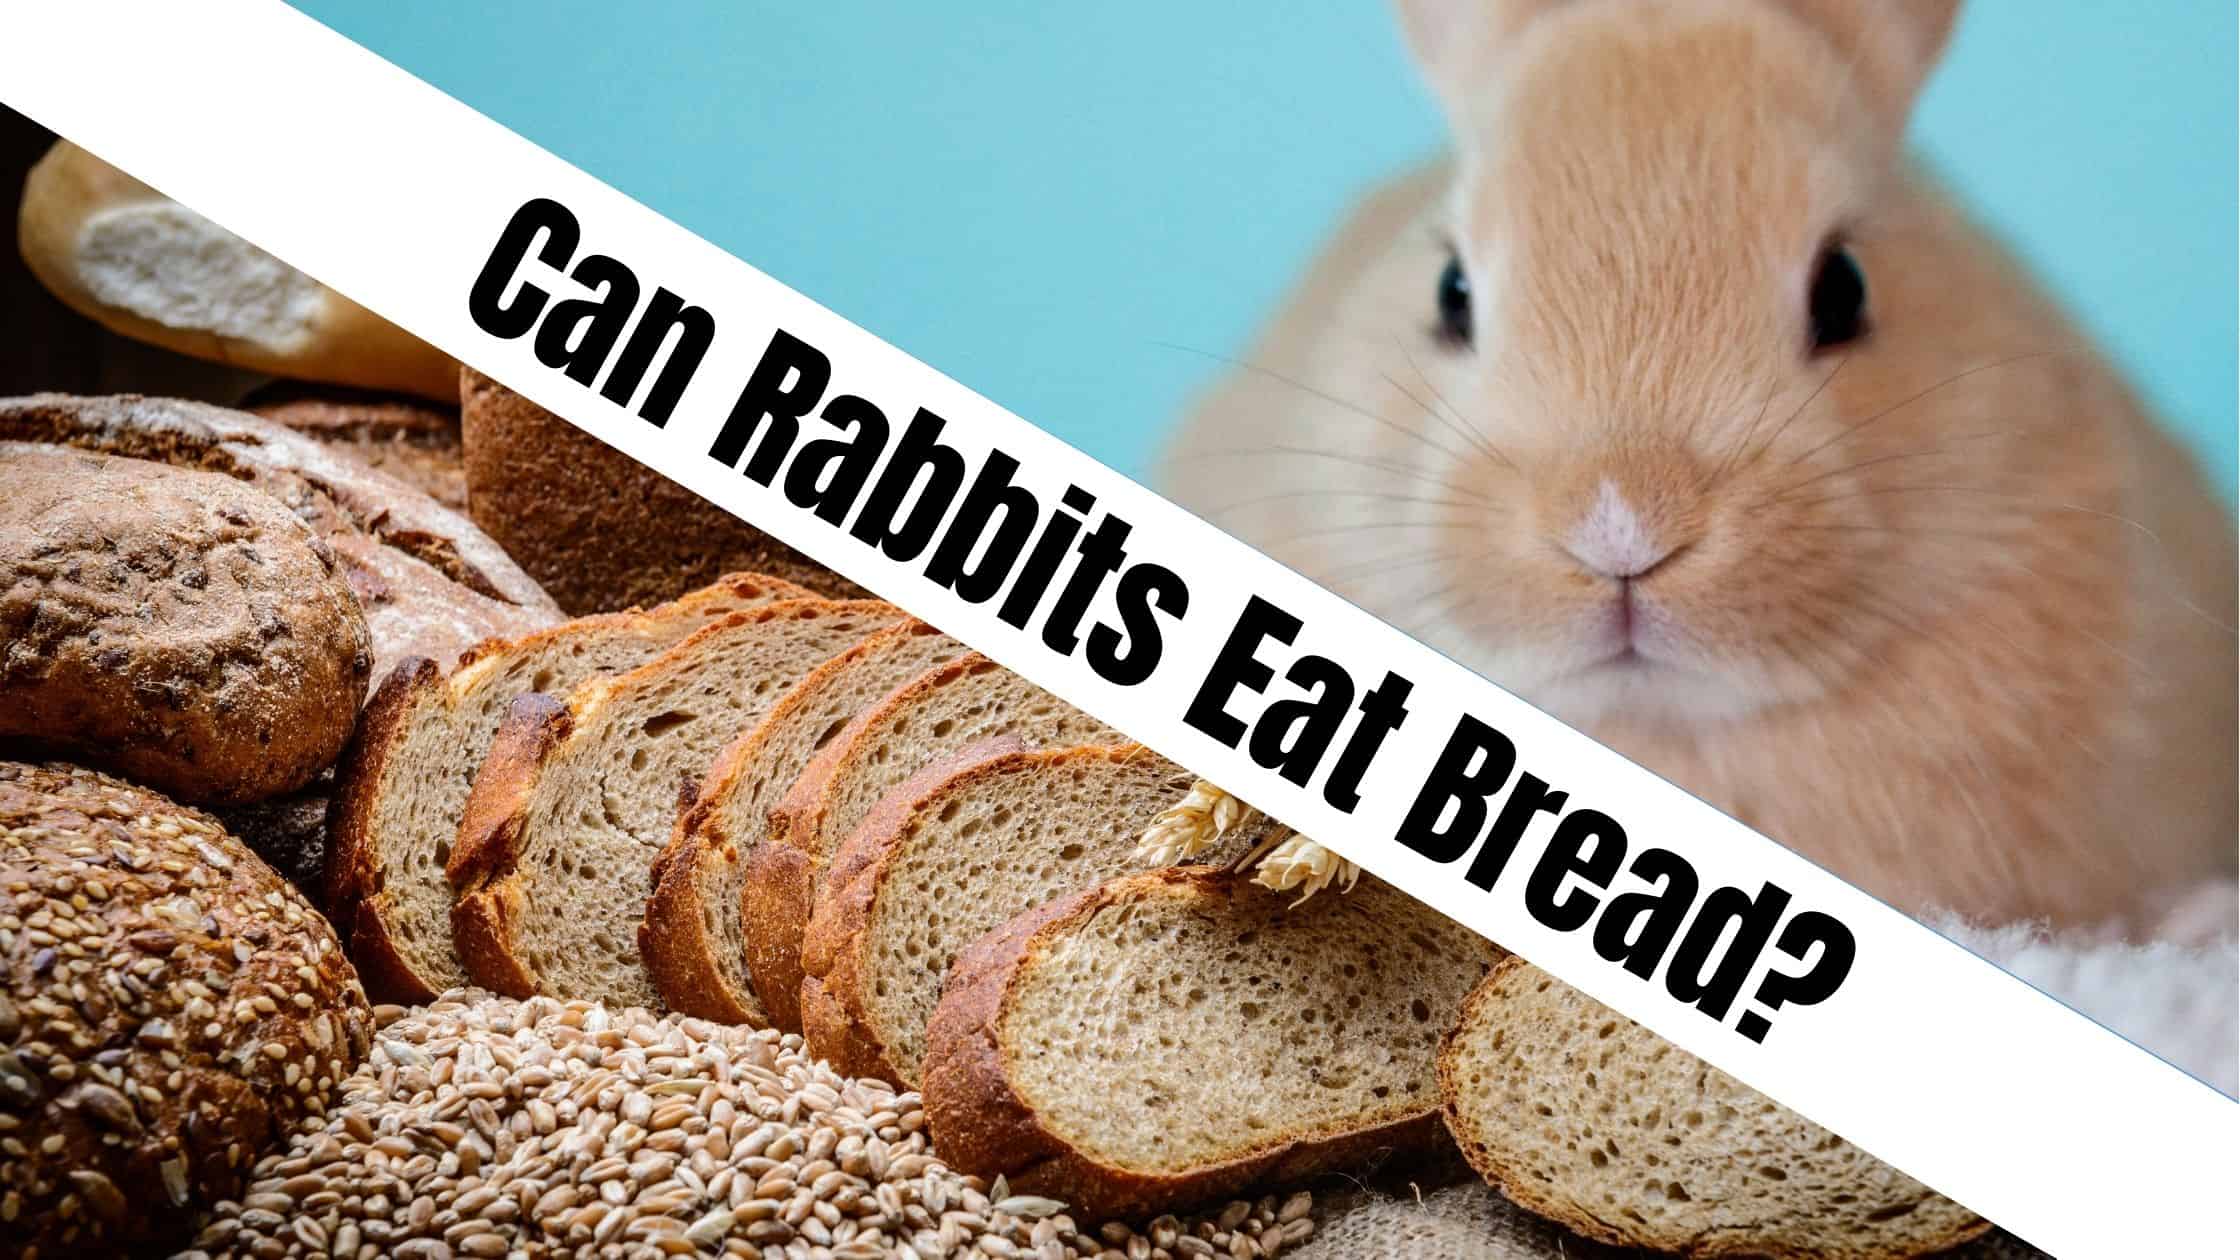 Can Rabbits Eat Bread?